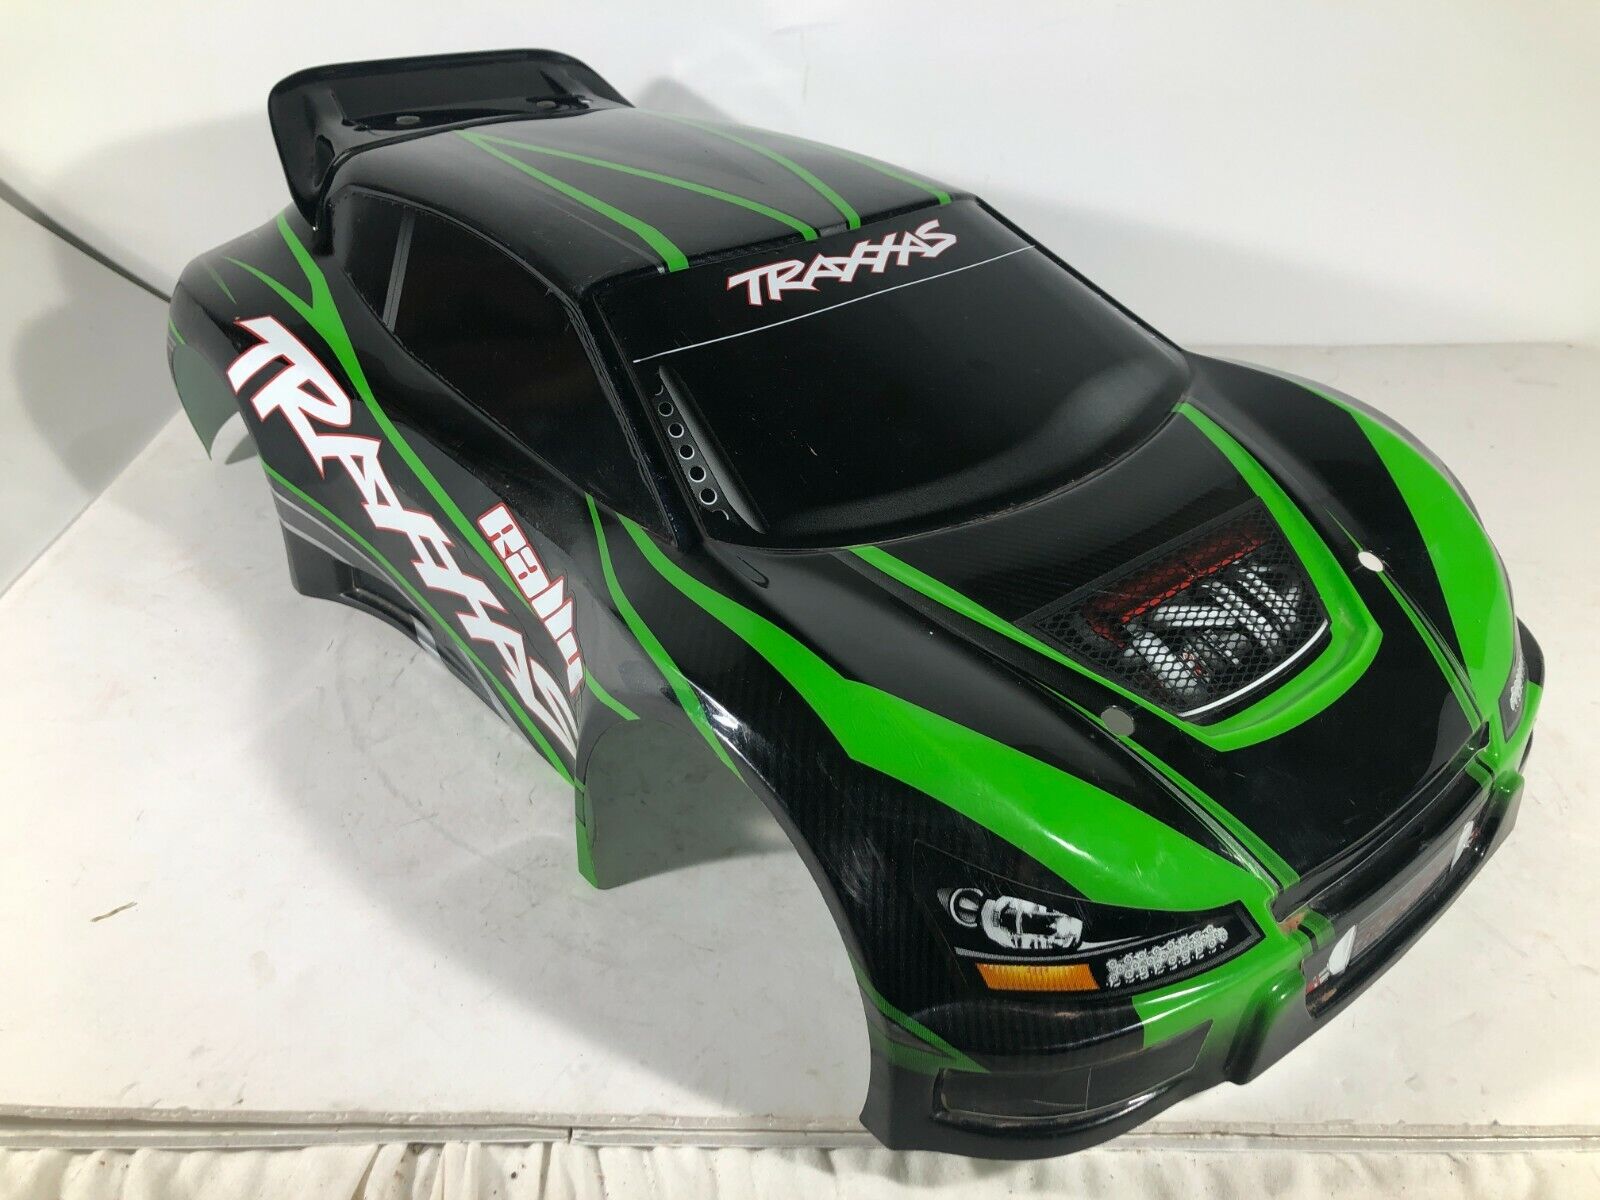 RARE TRAXXAS RALLY 1/10 VXL GREEN BODY, RAN ONCE! SEE IMAGES